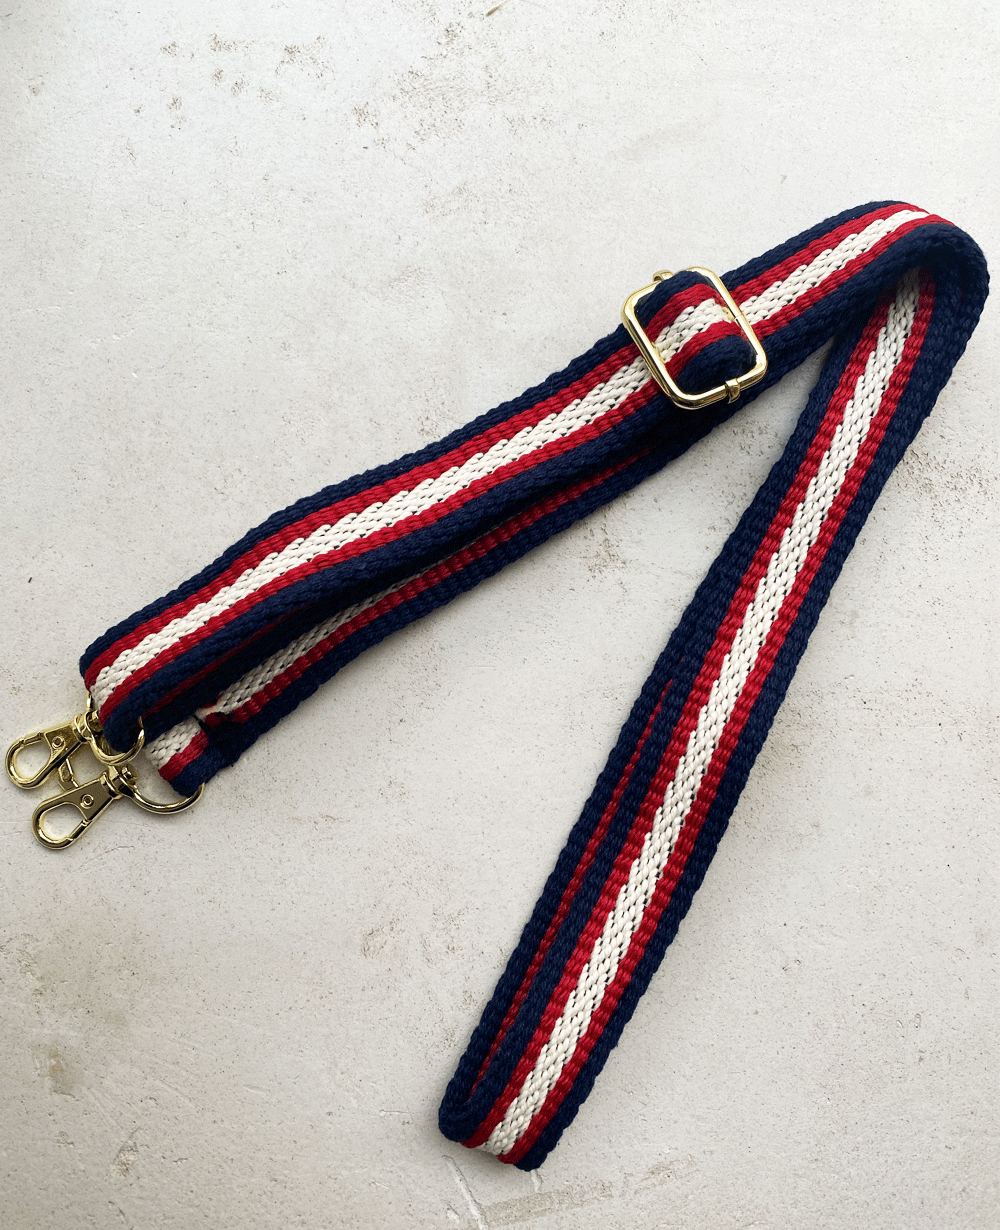 WOVEN PHONE STRAP "STRIPES" BLUE/RED/WHITE